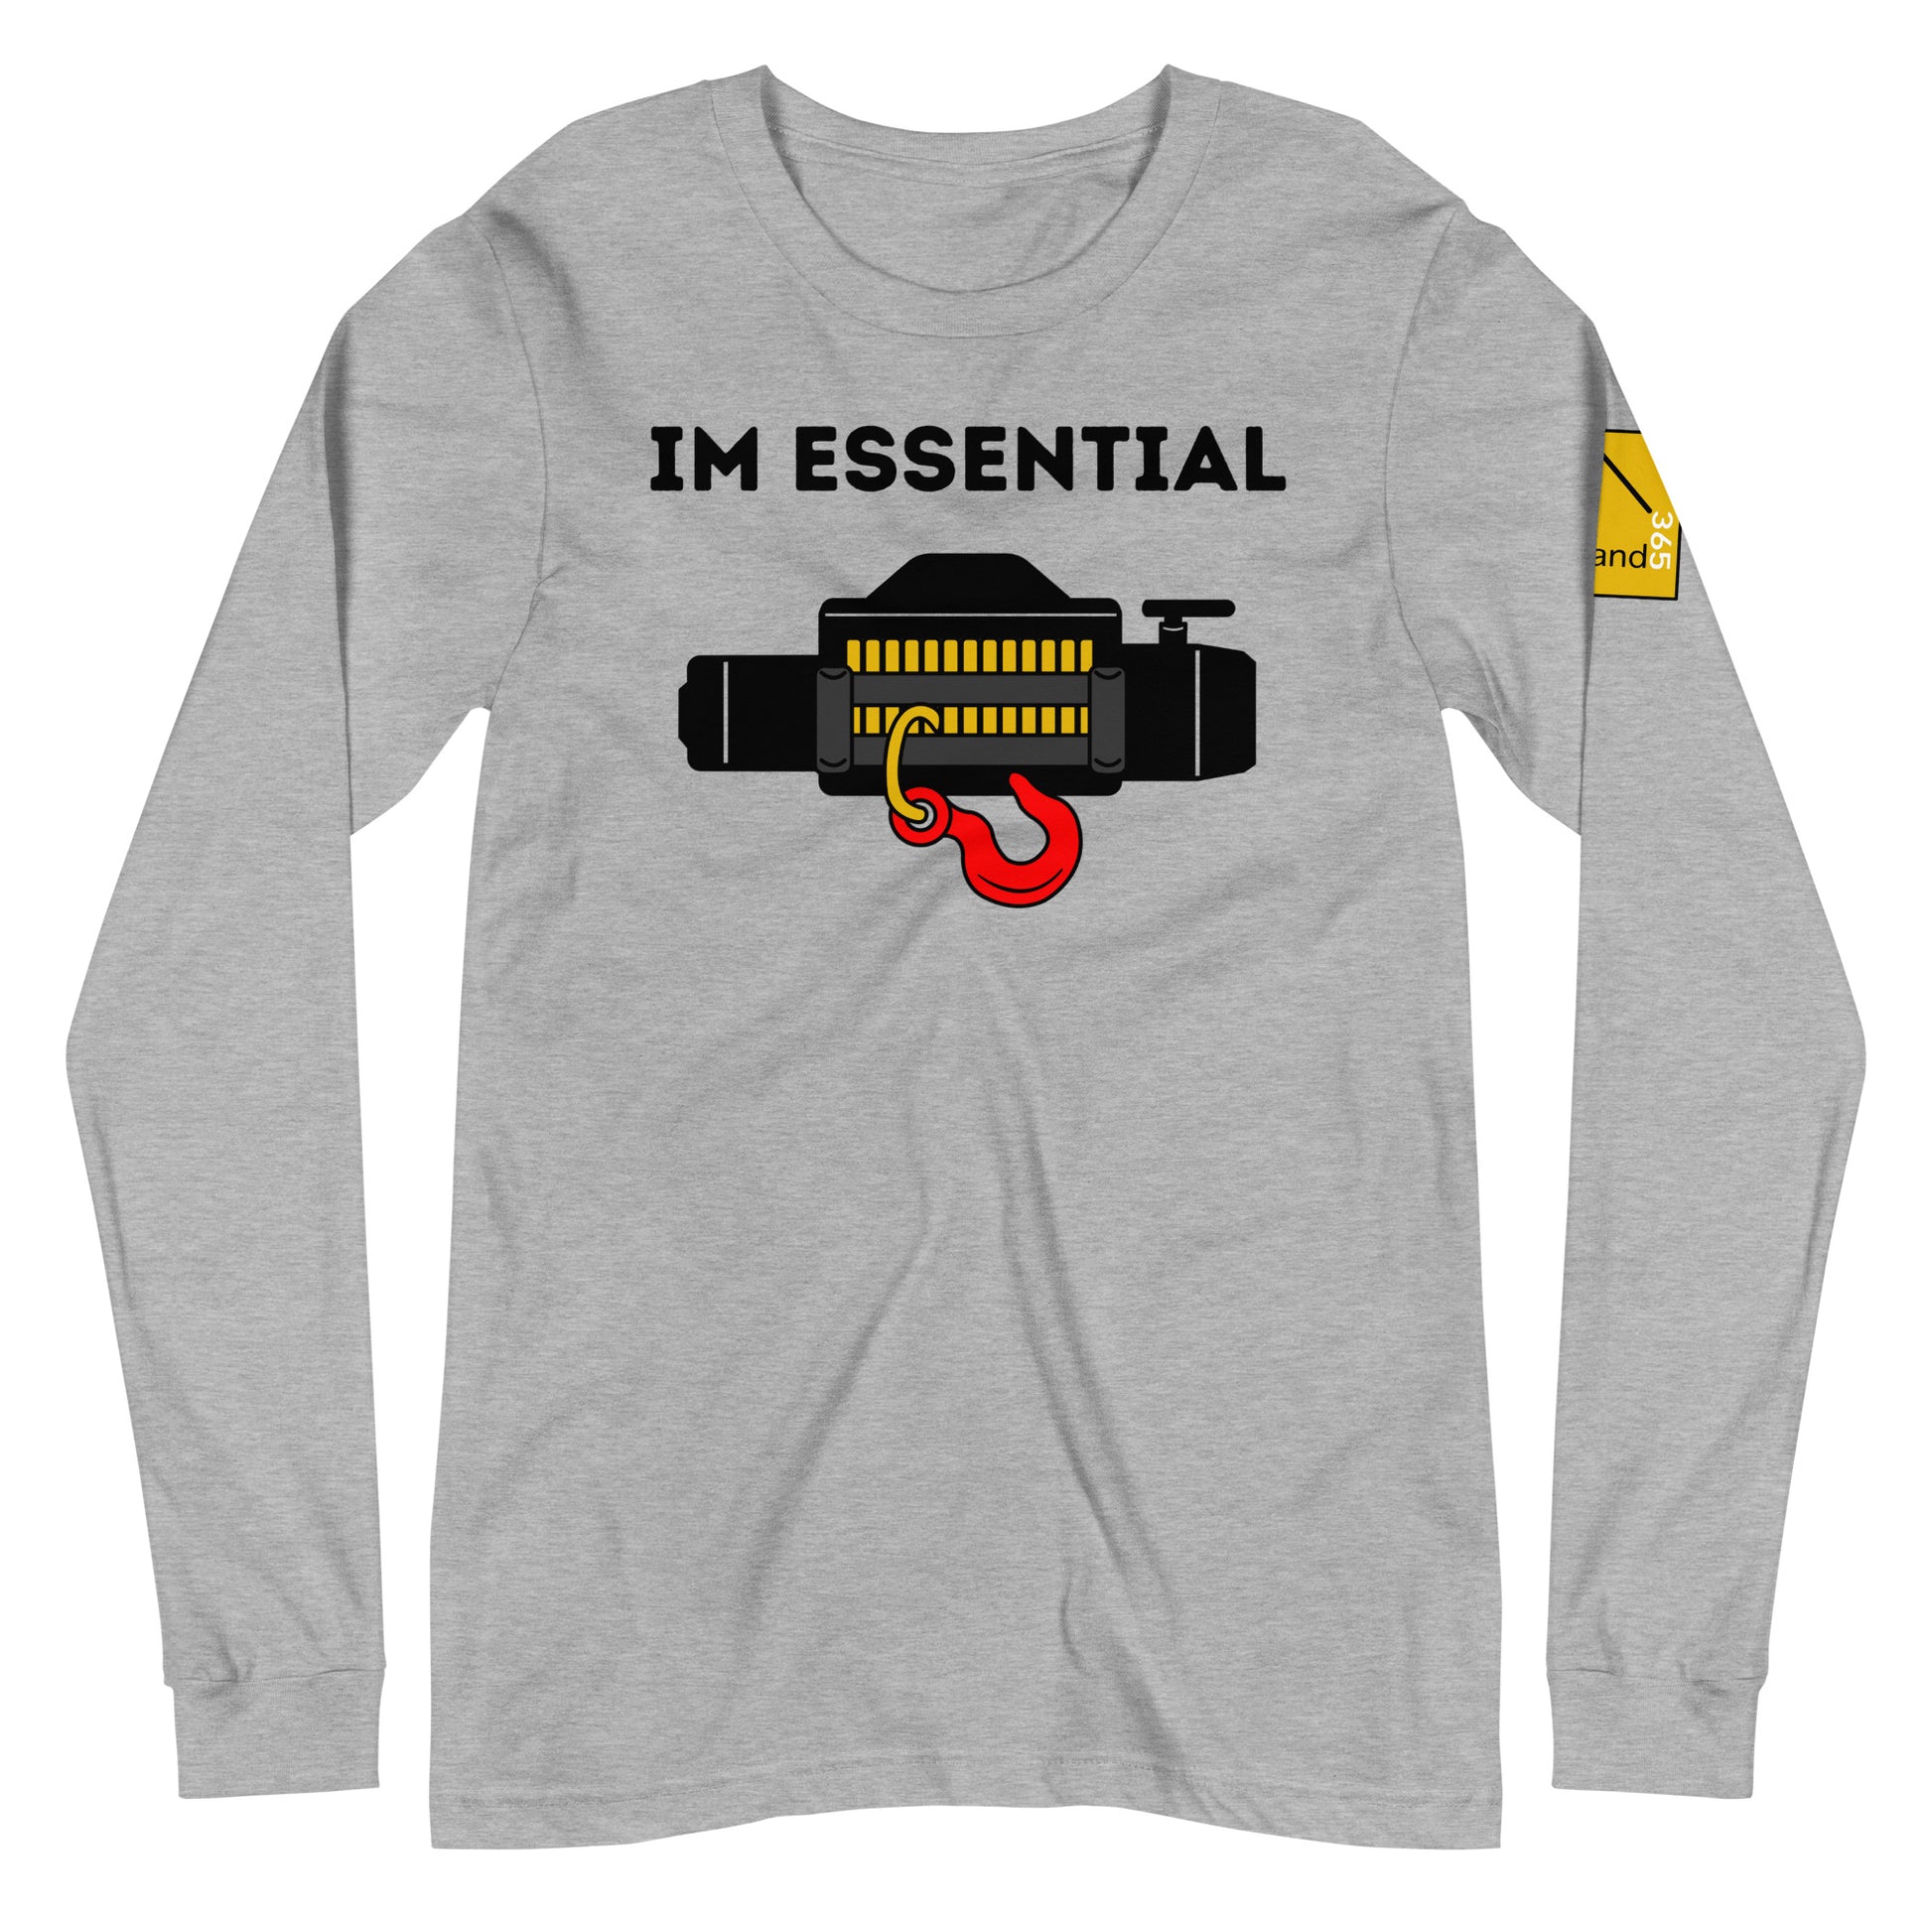 IM ESSENTIAL - Overland Off-roading recovery winch. Light Grey long-sleeve. overland365.com